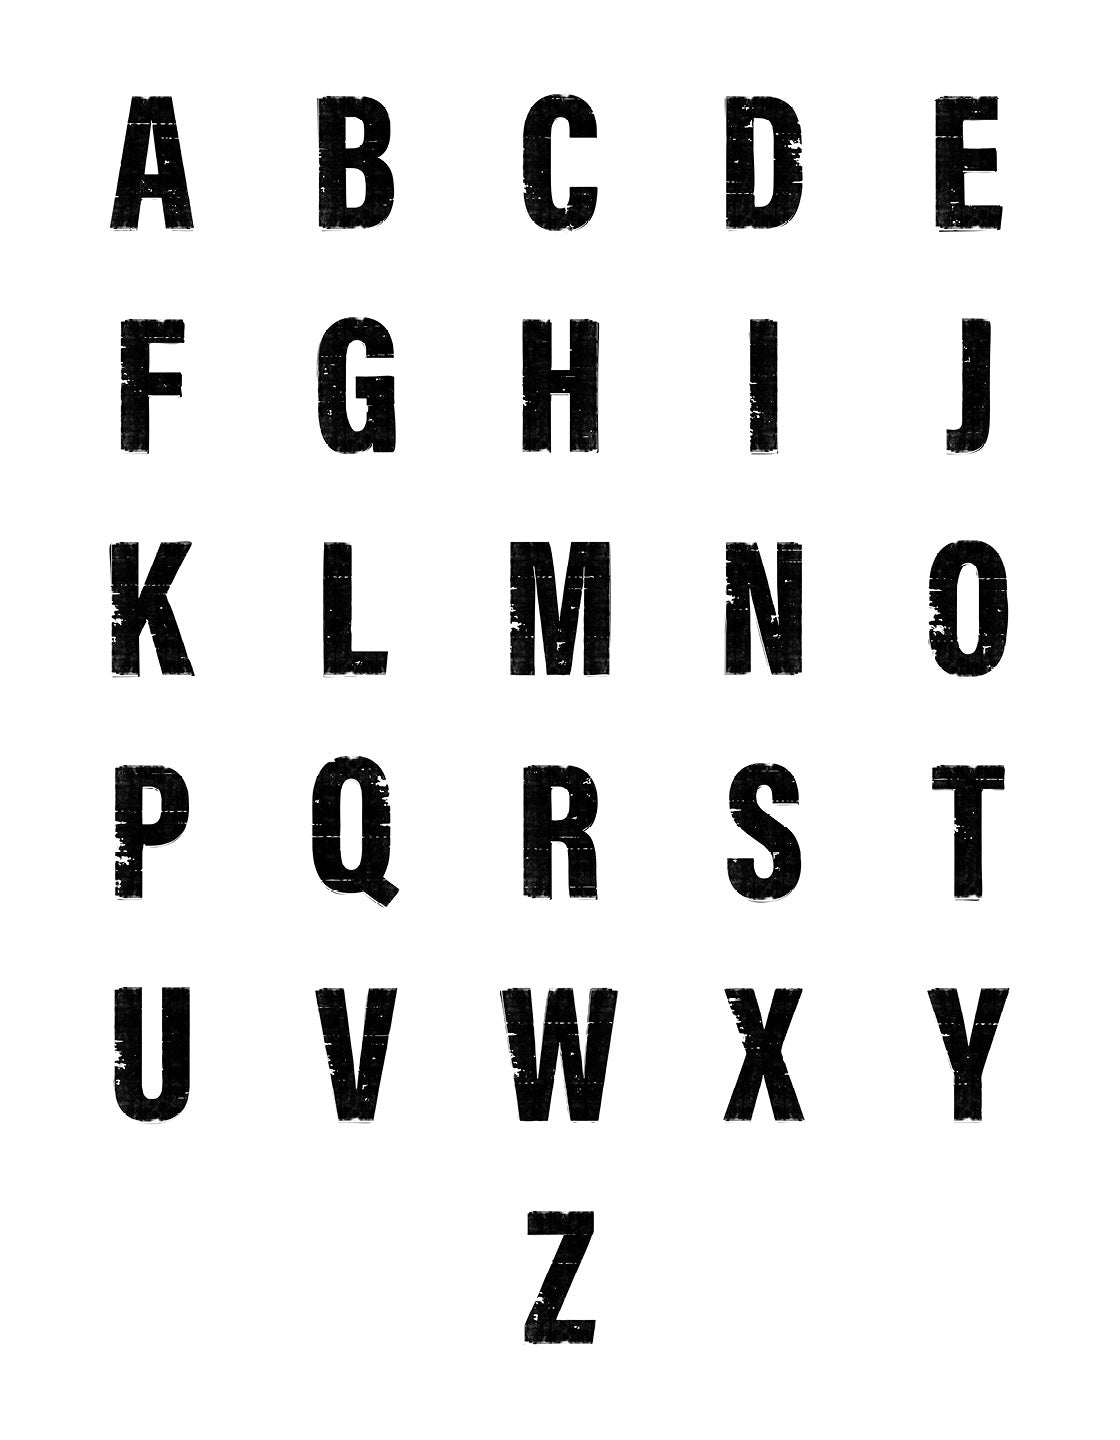 Image shows all the letters of the alphabet in black font against a white background